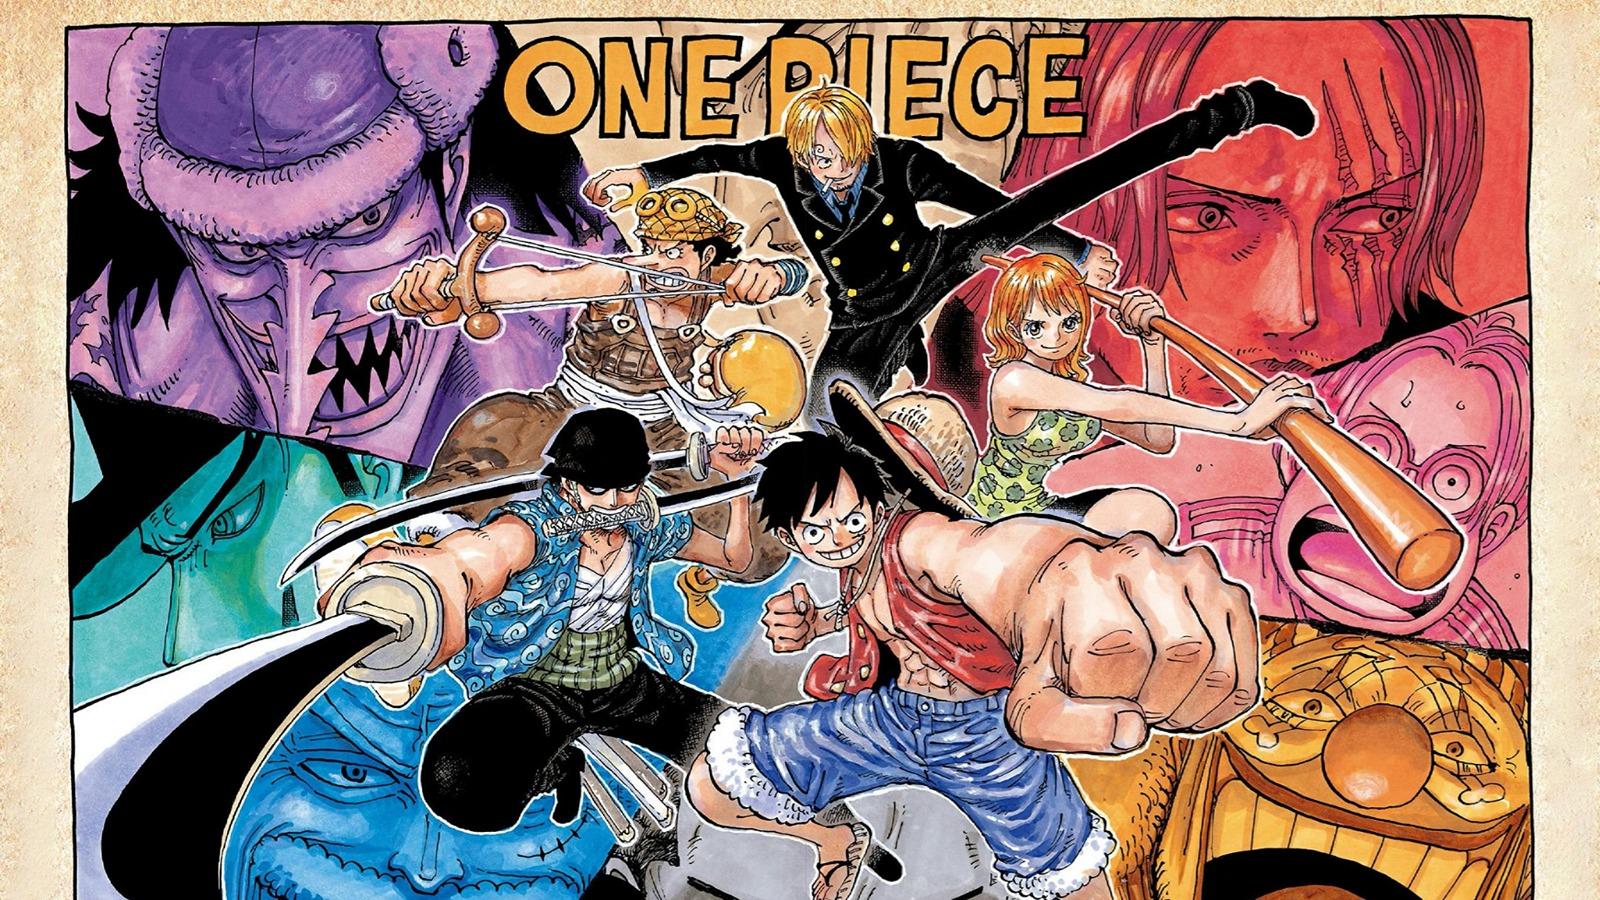 One Piece chapter 1090 spoilers